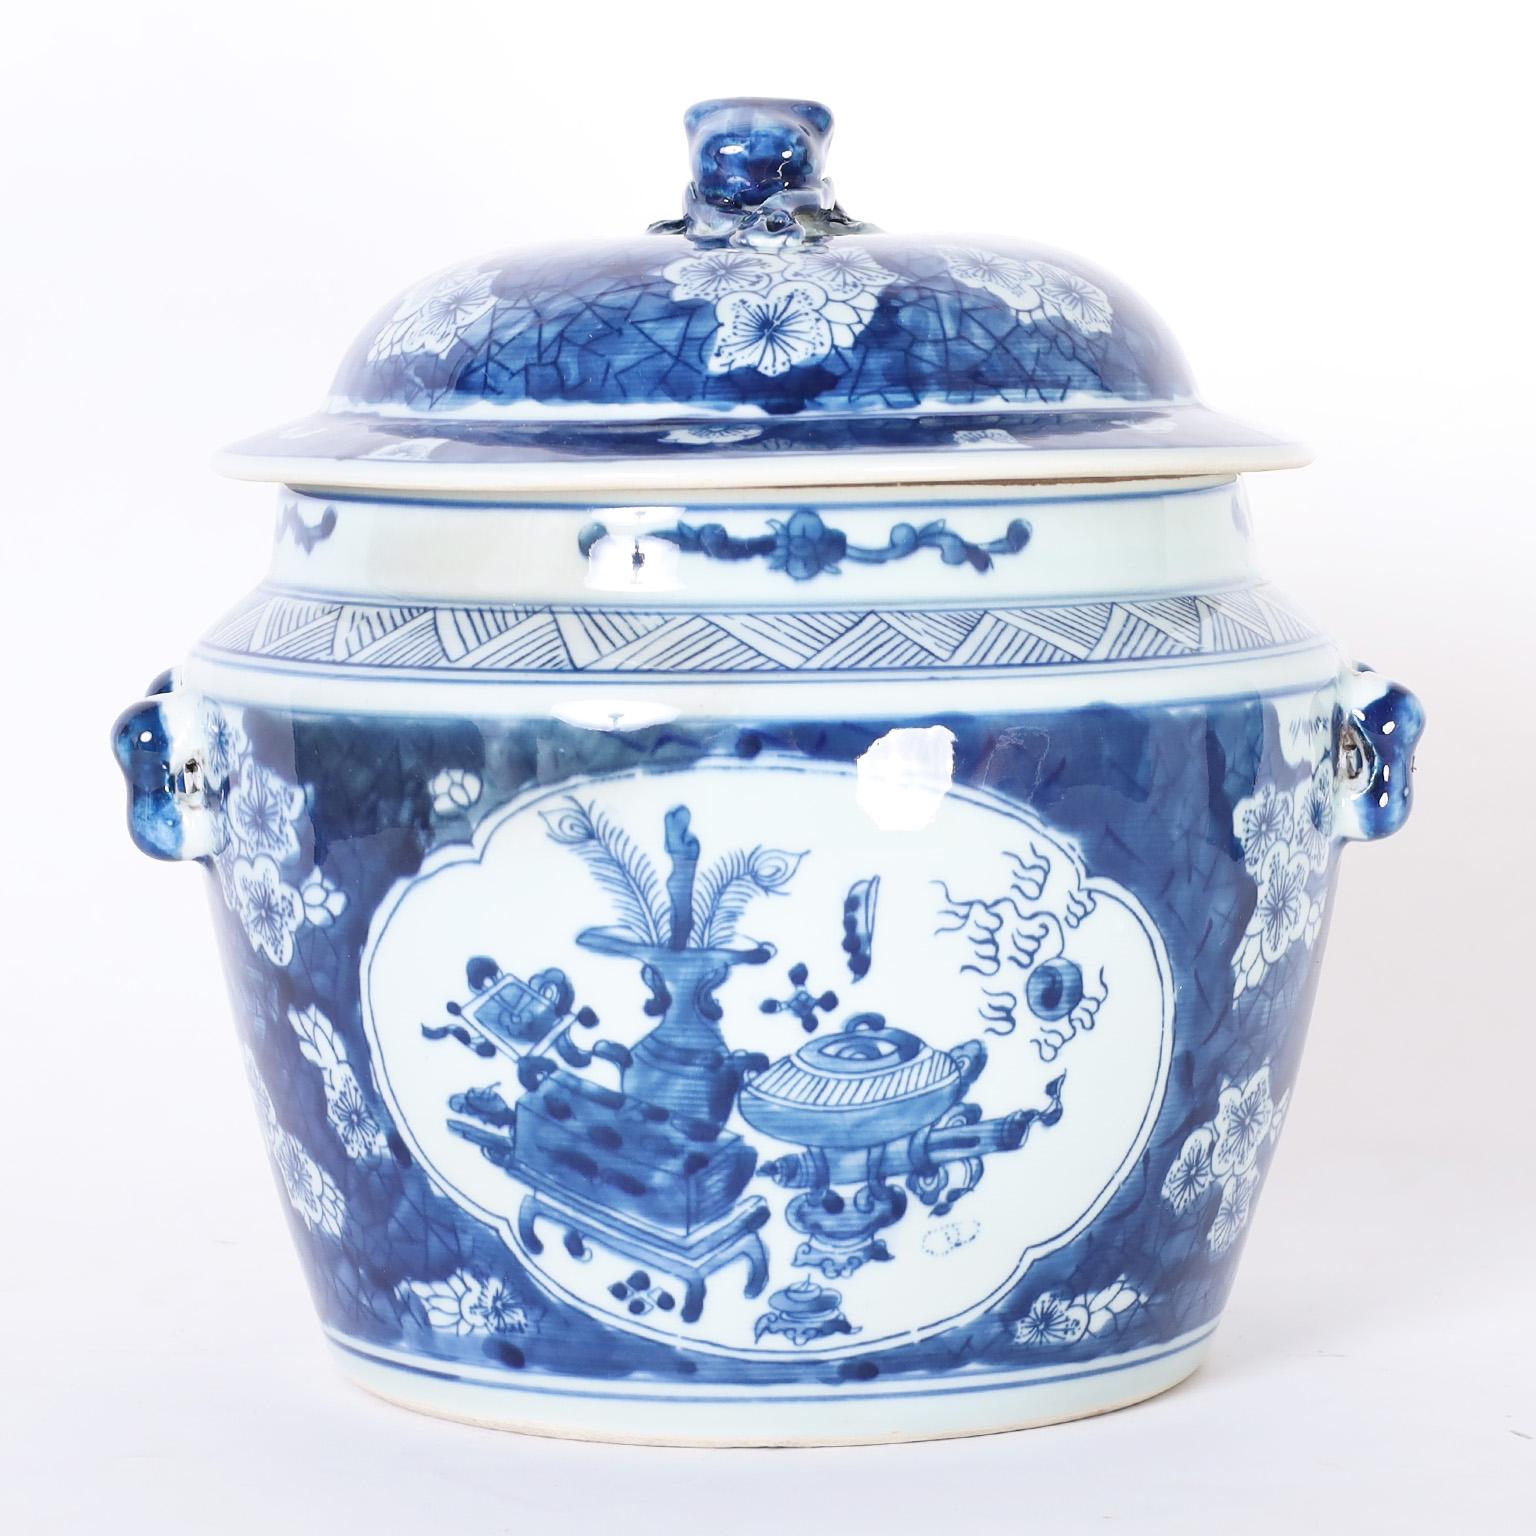 Pair of Chinese blue and white porcelain lidded pots with figural handles and hand decorated with still life panels inside a blue background with flowers.